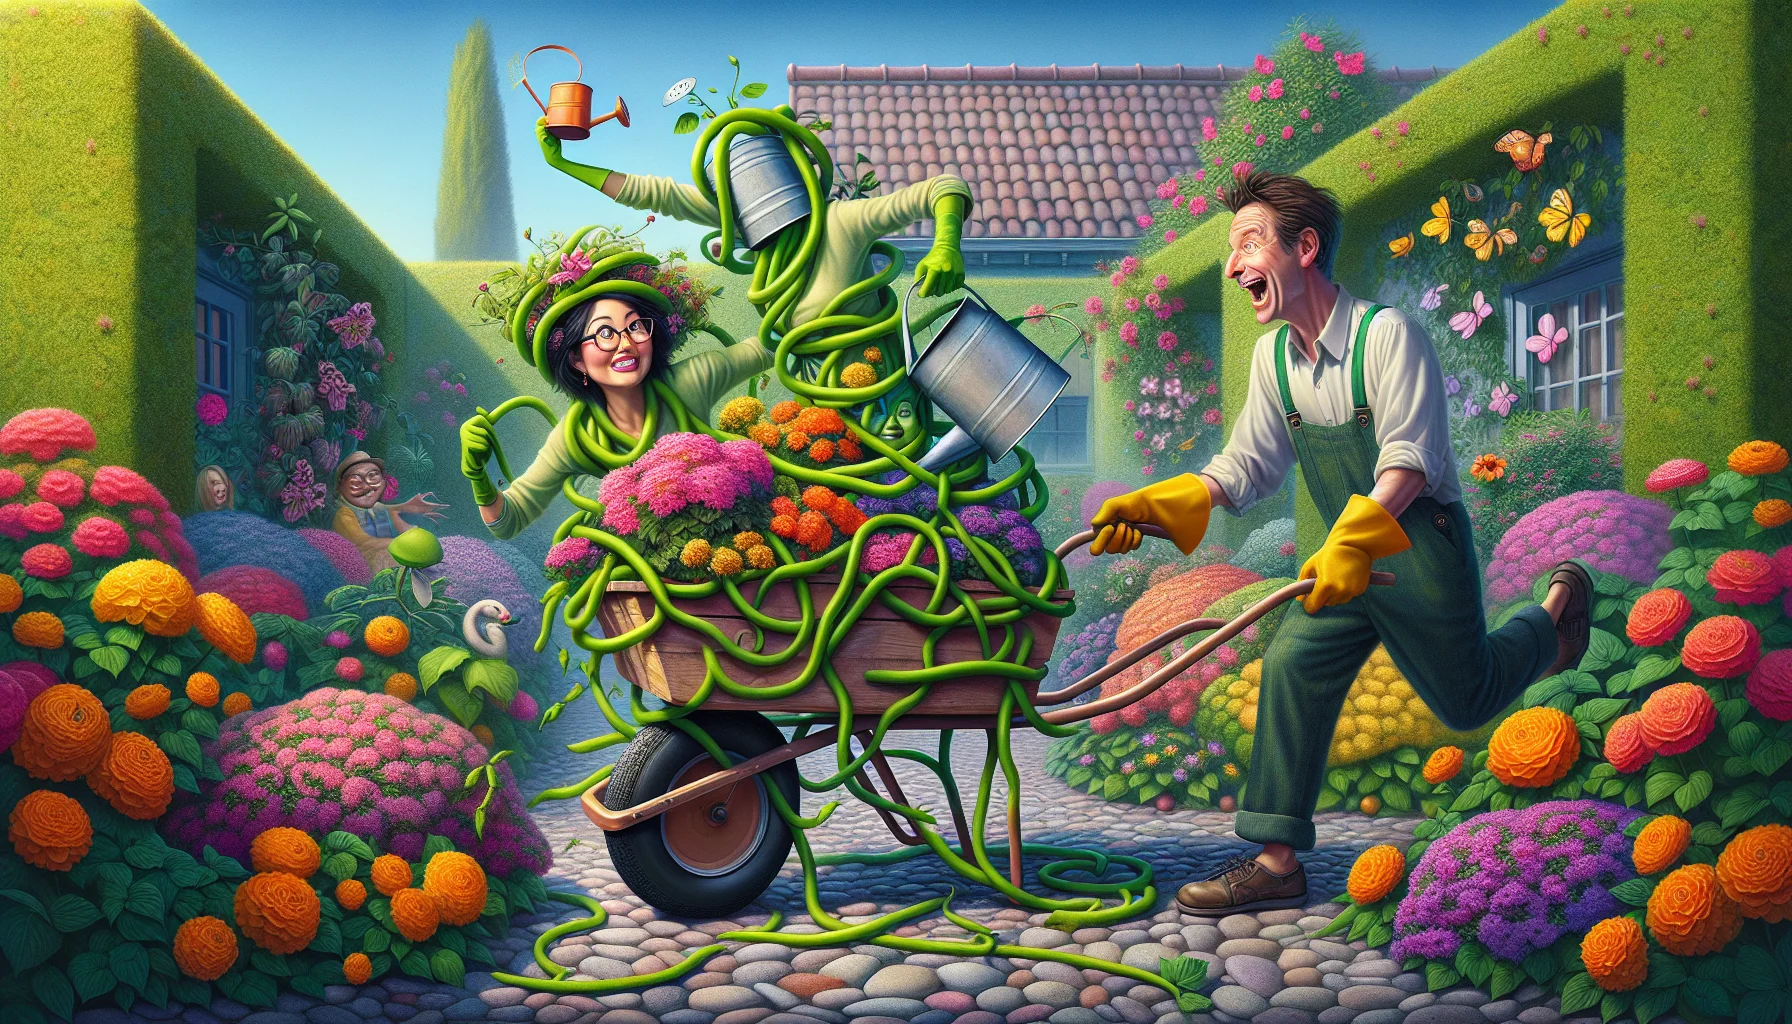 A hilariously whimsical scene depicting The Artistic Gardener, a character known for their love of nature. Picture a South Asian woman with a vivid green thumb, playfully tangled up in creeping, brightly colored vine plants in the midst of a beautiful, overflowing garden. She's trying to balance a watering can on her head, wearing a pair of oversized gardening gloves and an expression of surprised enjoyment on her face. Her Caucasian male companion is laughing heartily, attempting to manage a wheelbarrow full of blooming flowers that are teetering on the edge of overturning. The scene communicates the sheer joy and unexpected hilarity that can come from a passionate commitment to gardening.